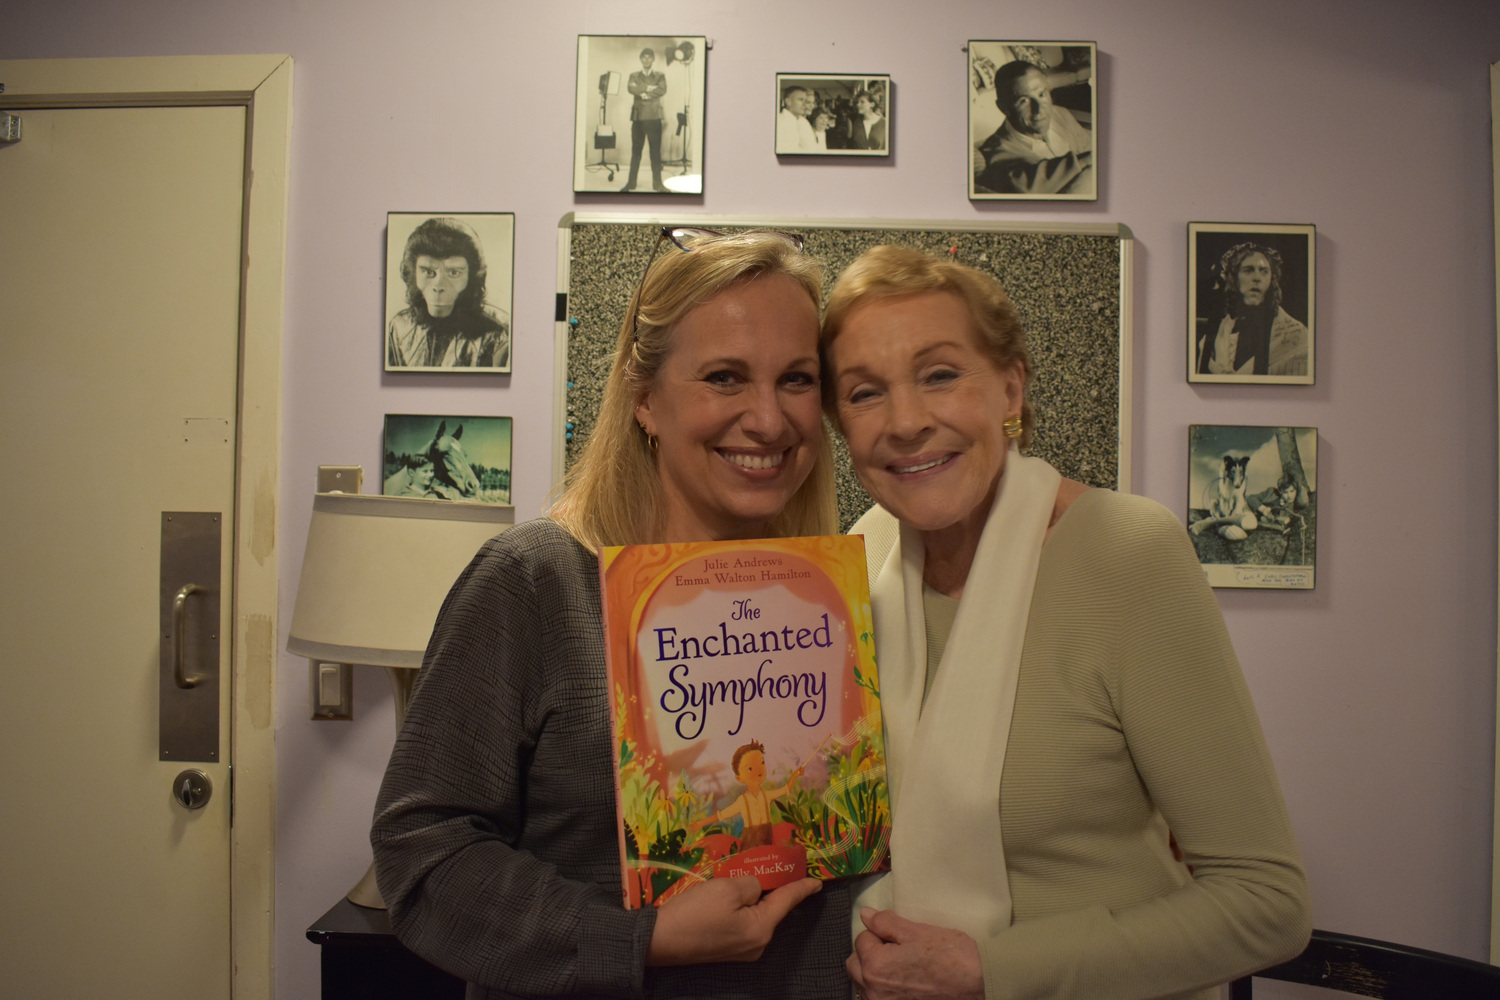 Bay Street Theater & Sag Harbor Center hosted a sold-out afternoon event featuring Julie Andrews and her co-author and daughter, Emma Walton Hamilton, who was also a founder of Bay Street Theater, to celebrate of the pre-release of their latest collaborative book 